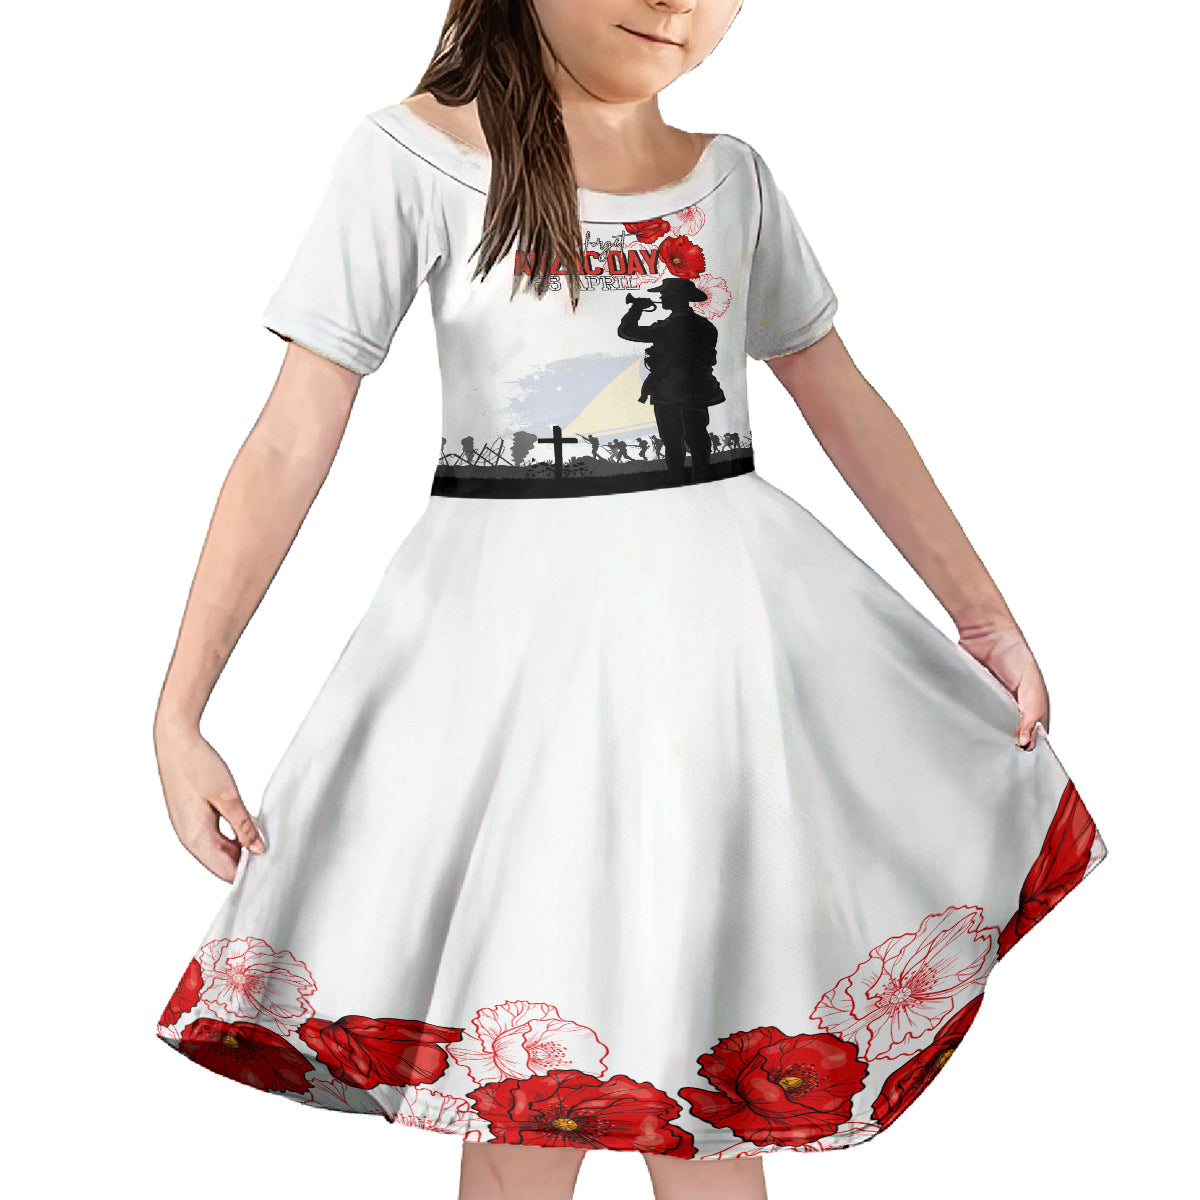 Tokelau ANZAC Day Kid Short Sleeve Dress Lest We Forget Red Poppy Flowers and Soldier LT03 KID White - Polynesian Pride